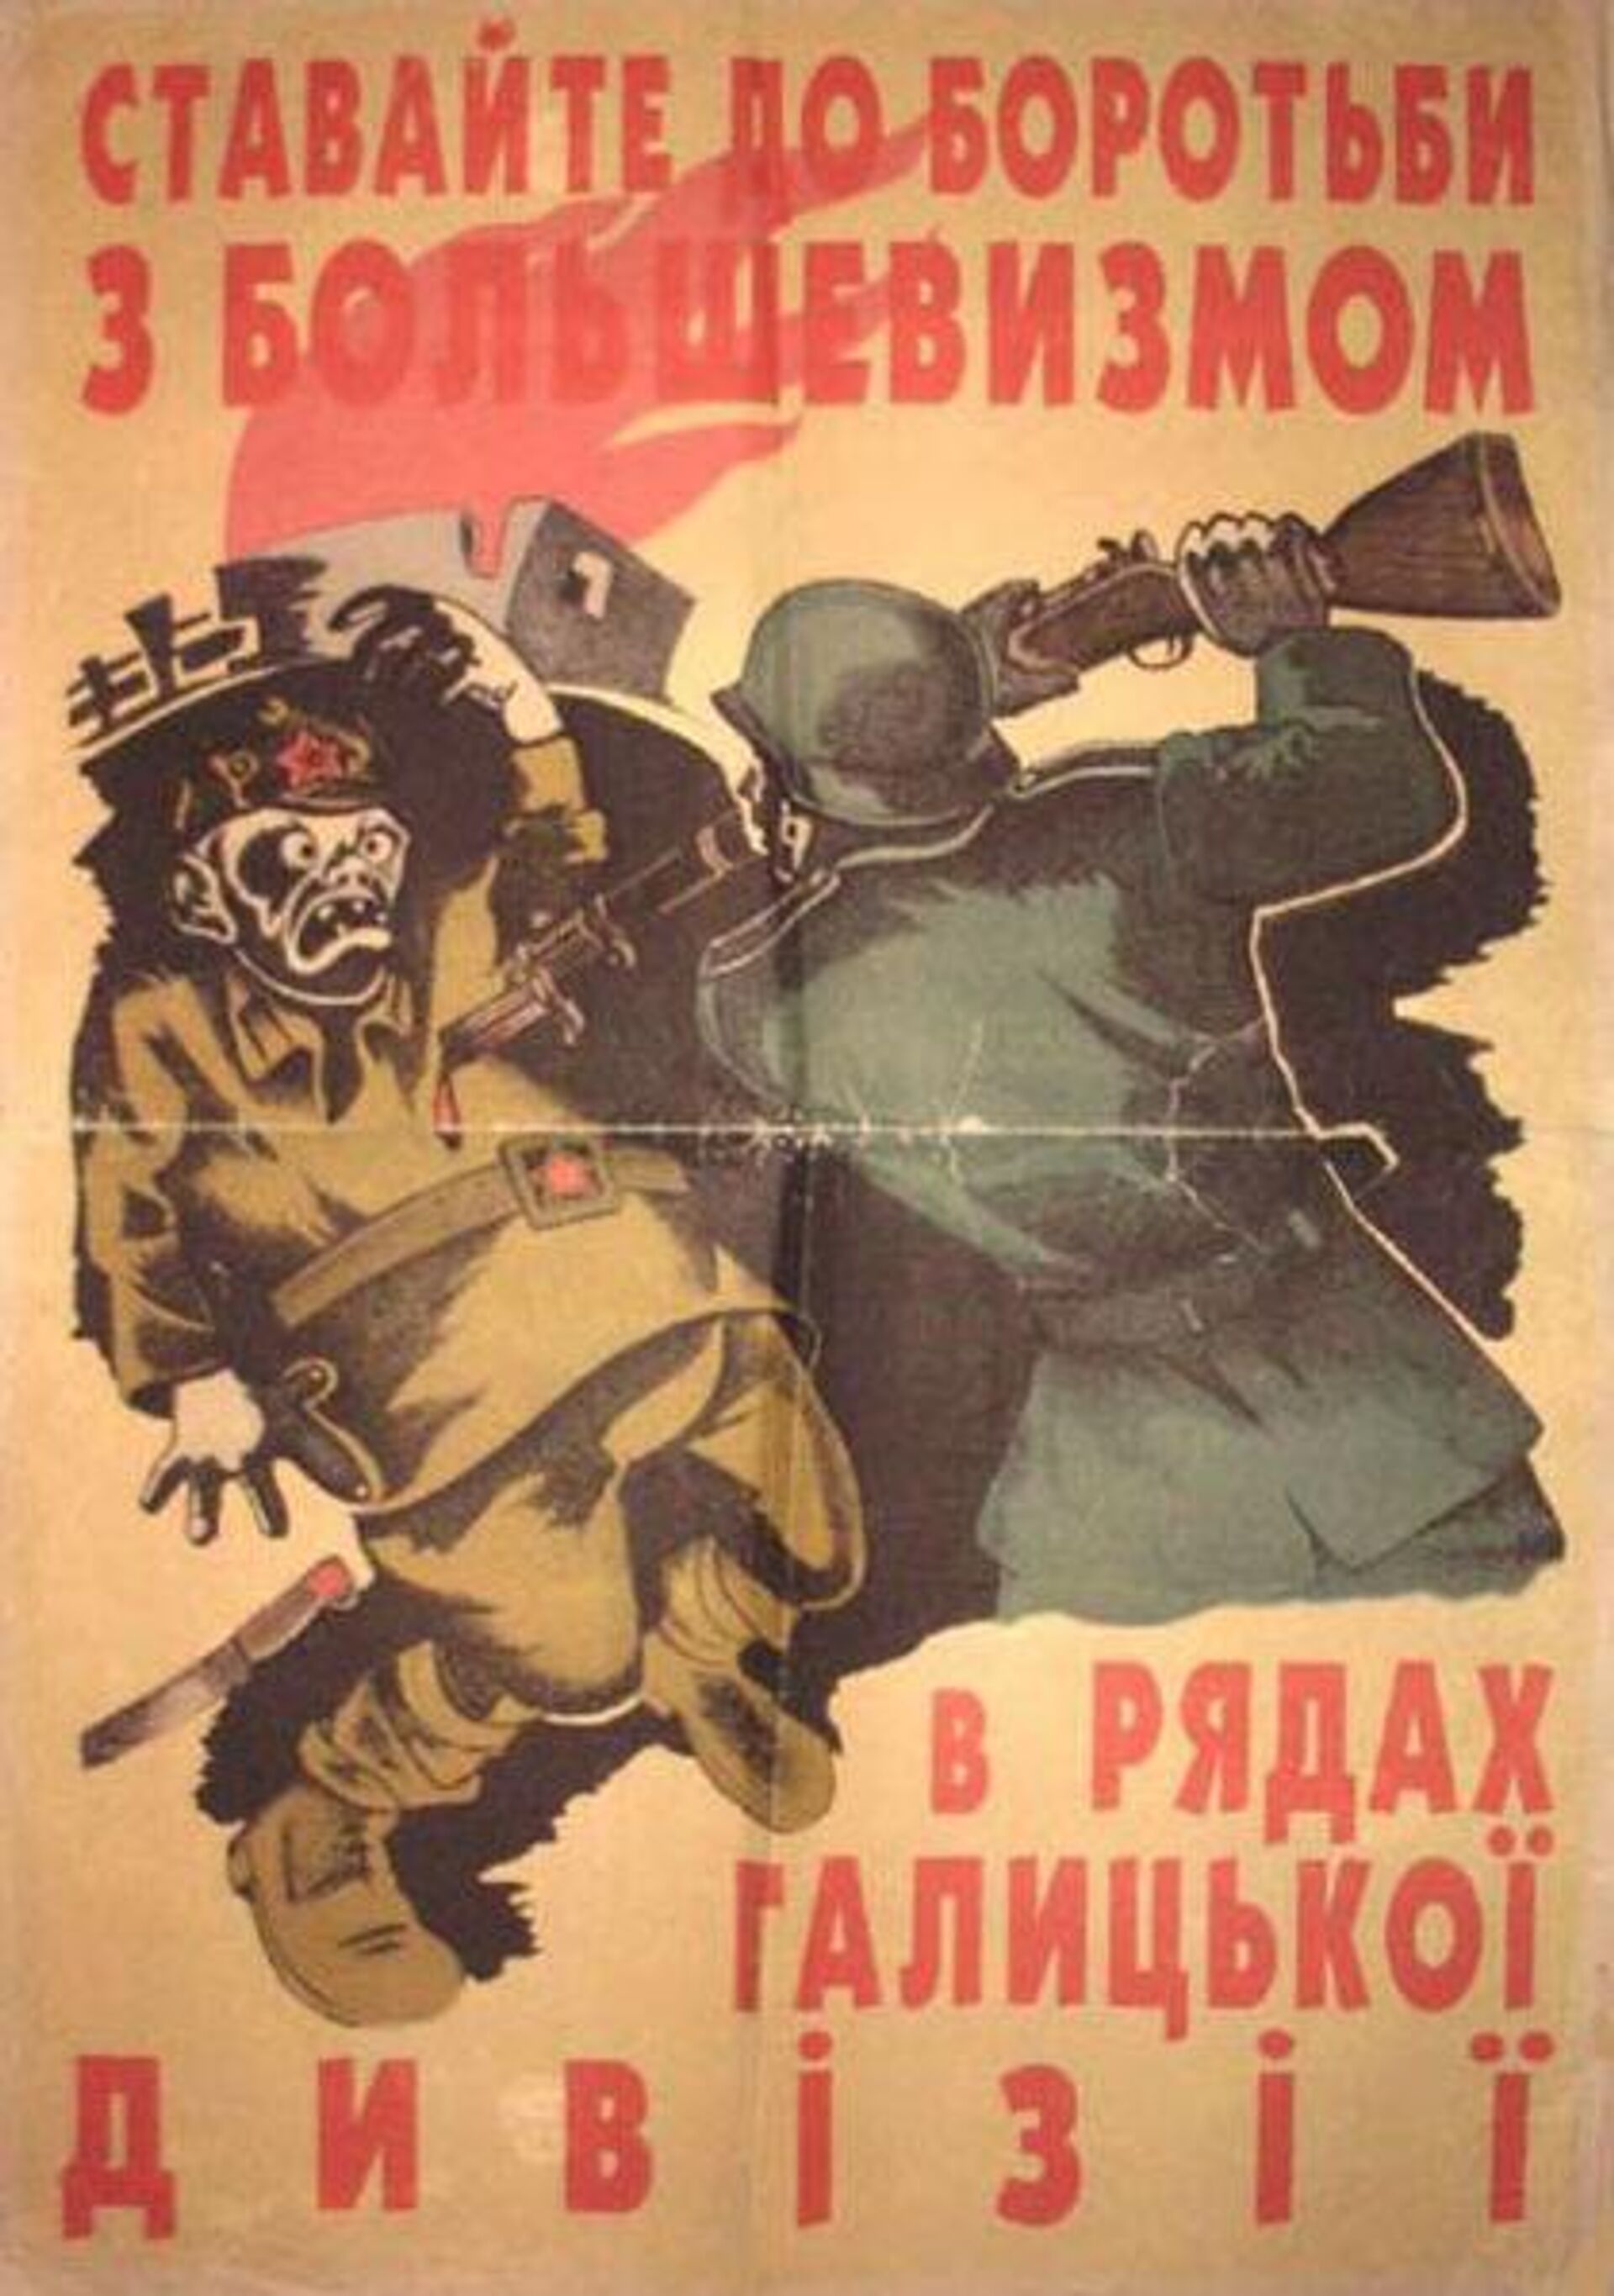 Propaganda poster from 1943 encouraging Ukrainians to Join the battle against Bolshevism in the ranks of the Galicia Division. - Sputnik International, 1920, 25.09.2023